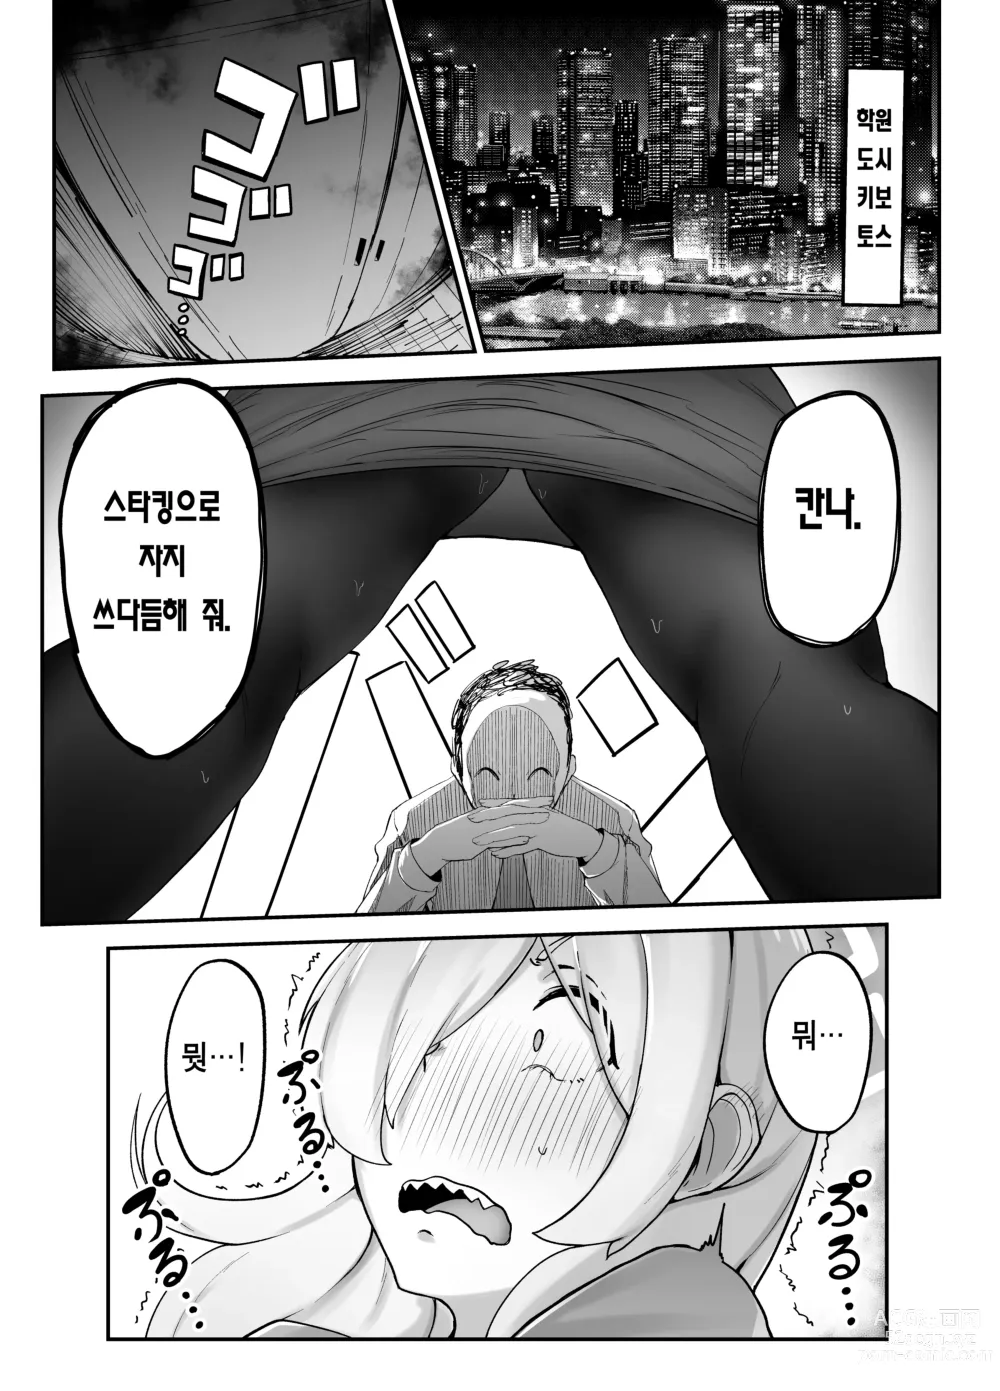 Page 2 of doujinshi 당번은 오가타 칸나